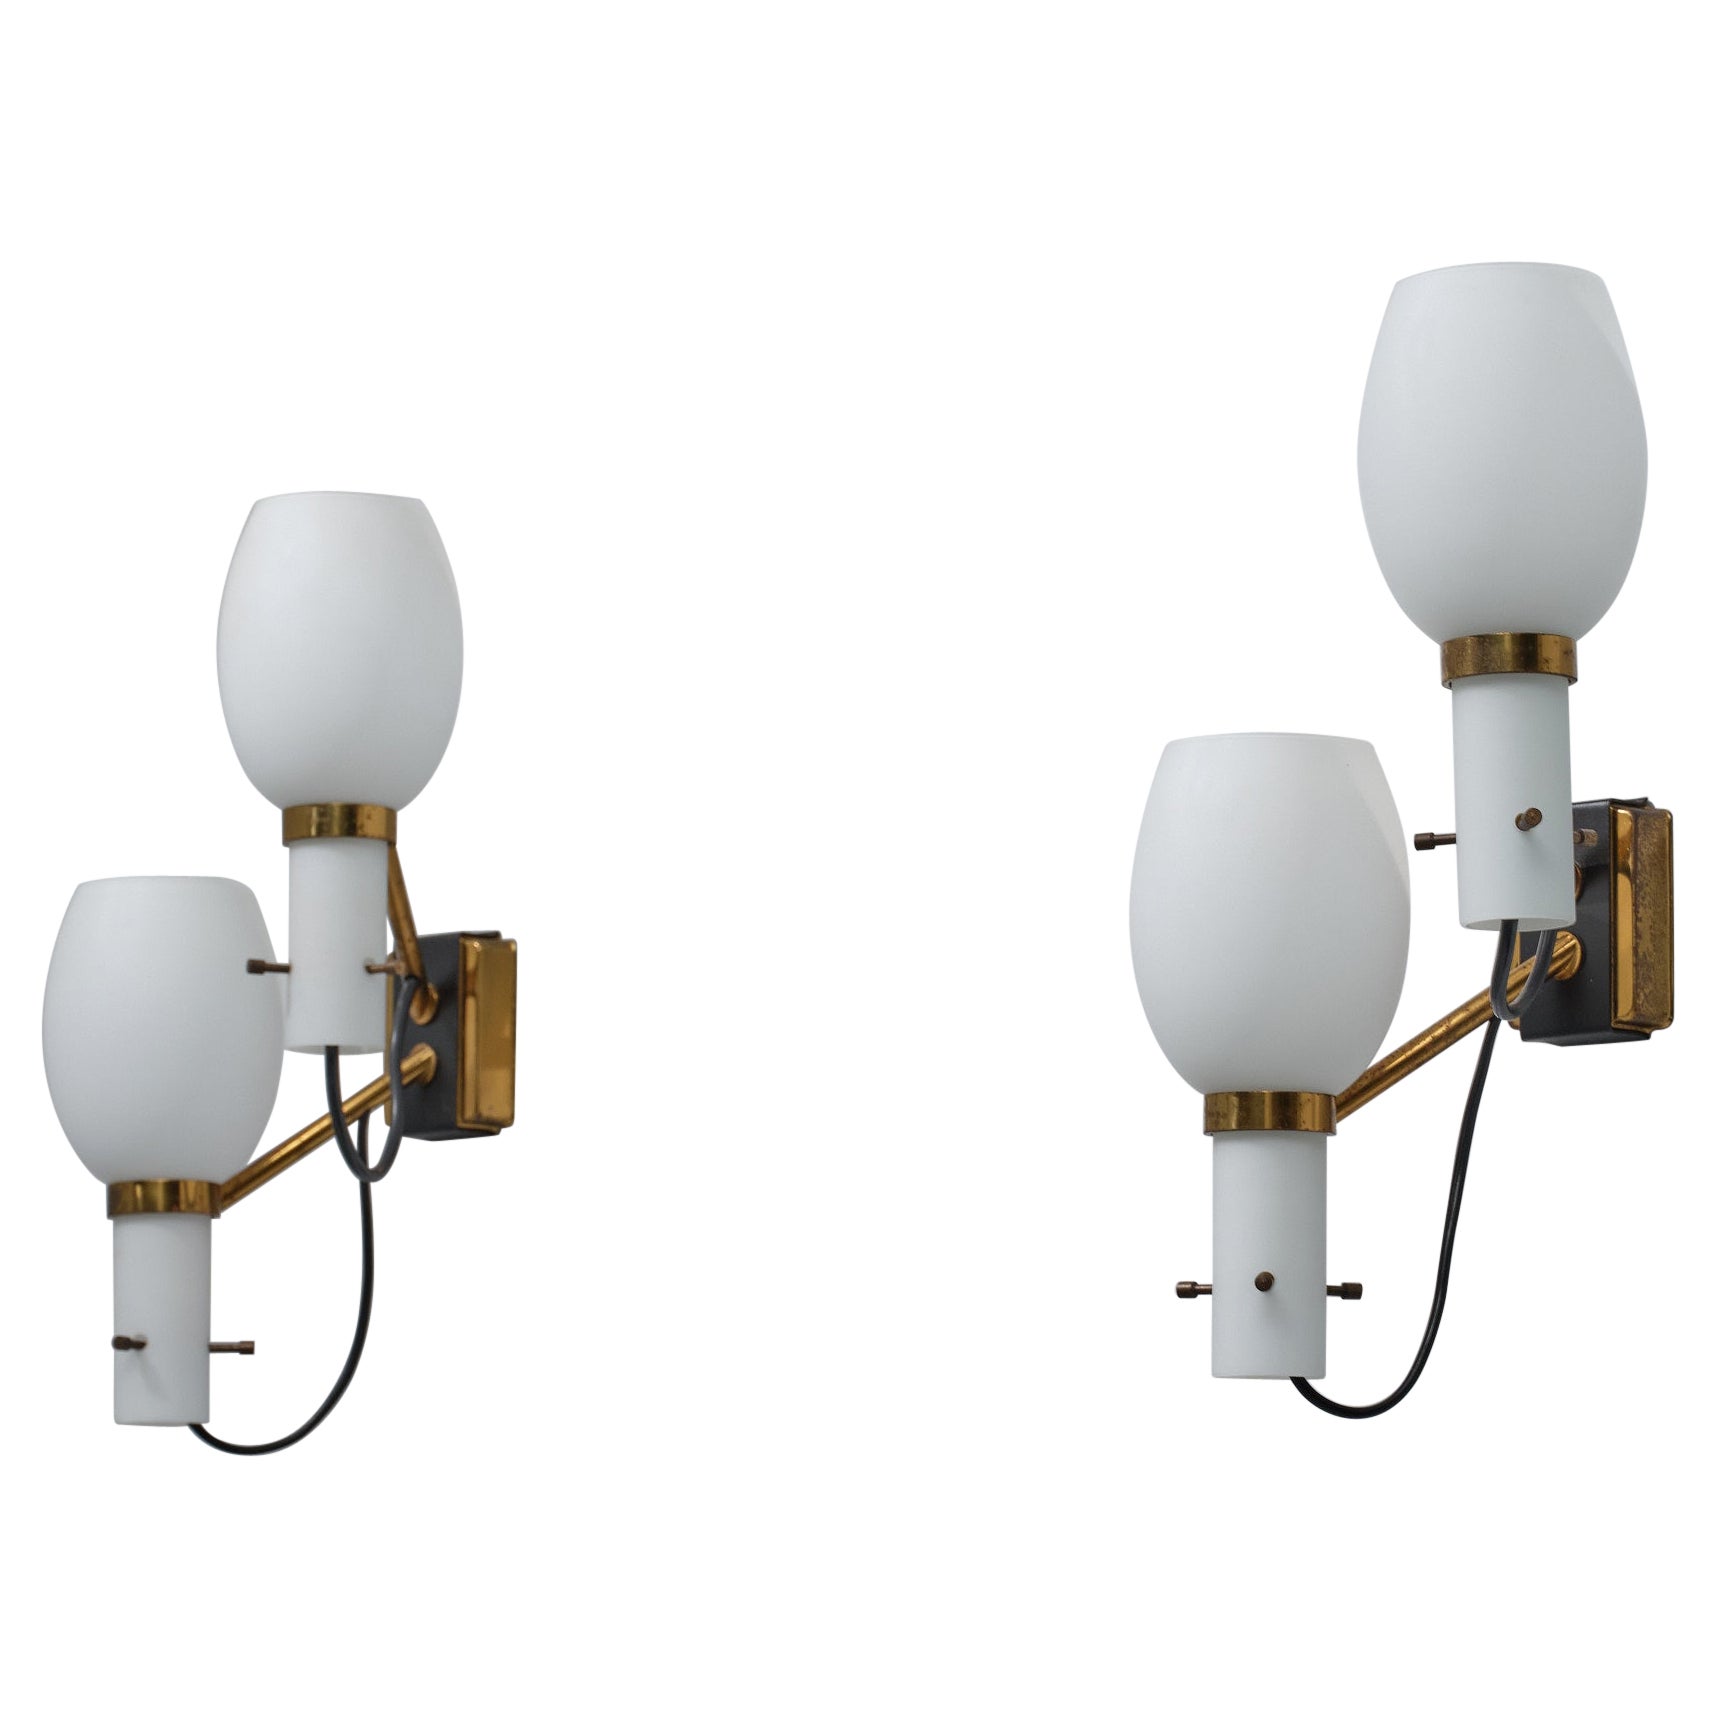 Exquisite Pair of Italian Mid-Century Modern Wall Sconces with Dual Light Source For Sale